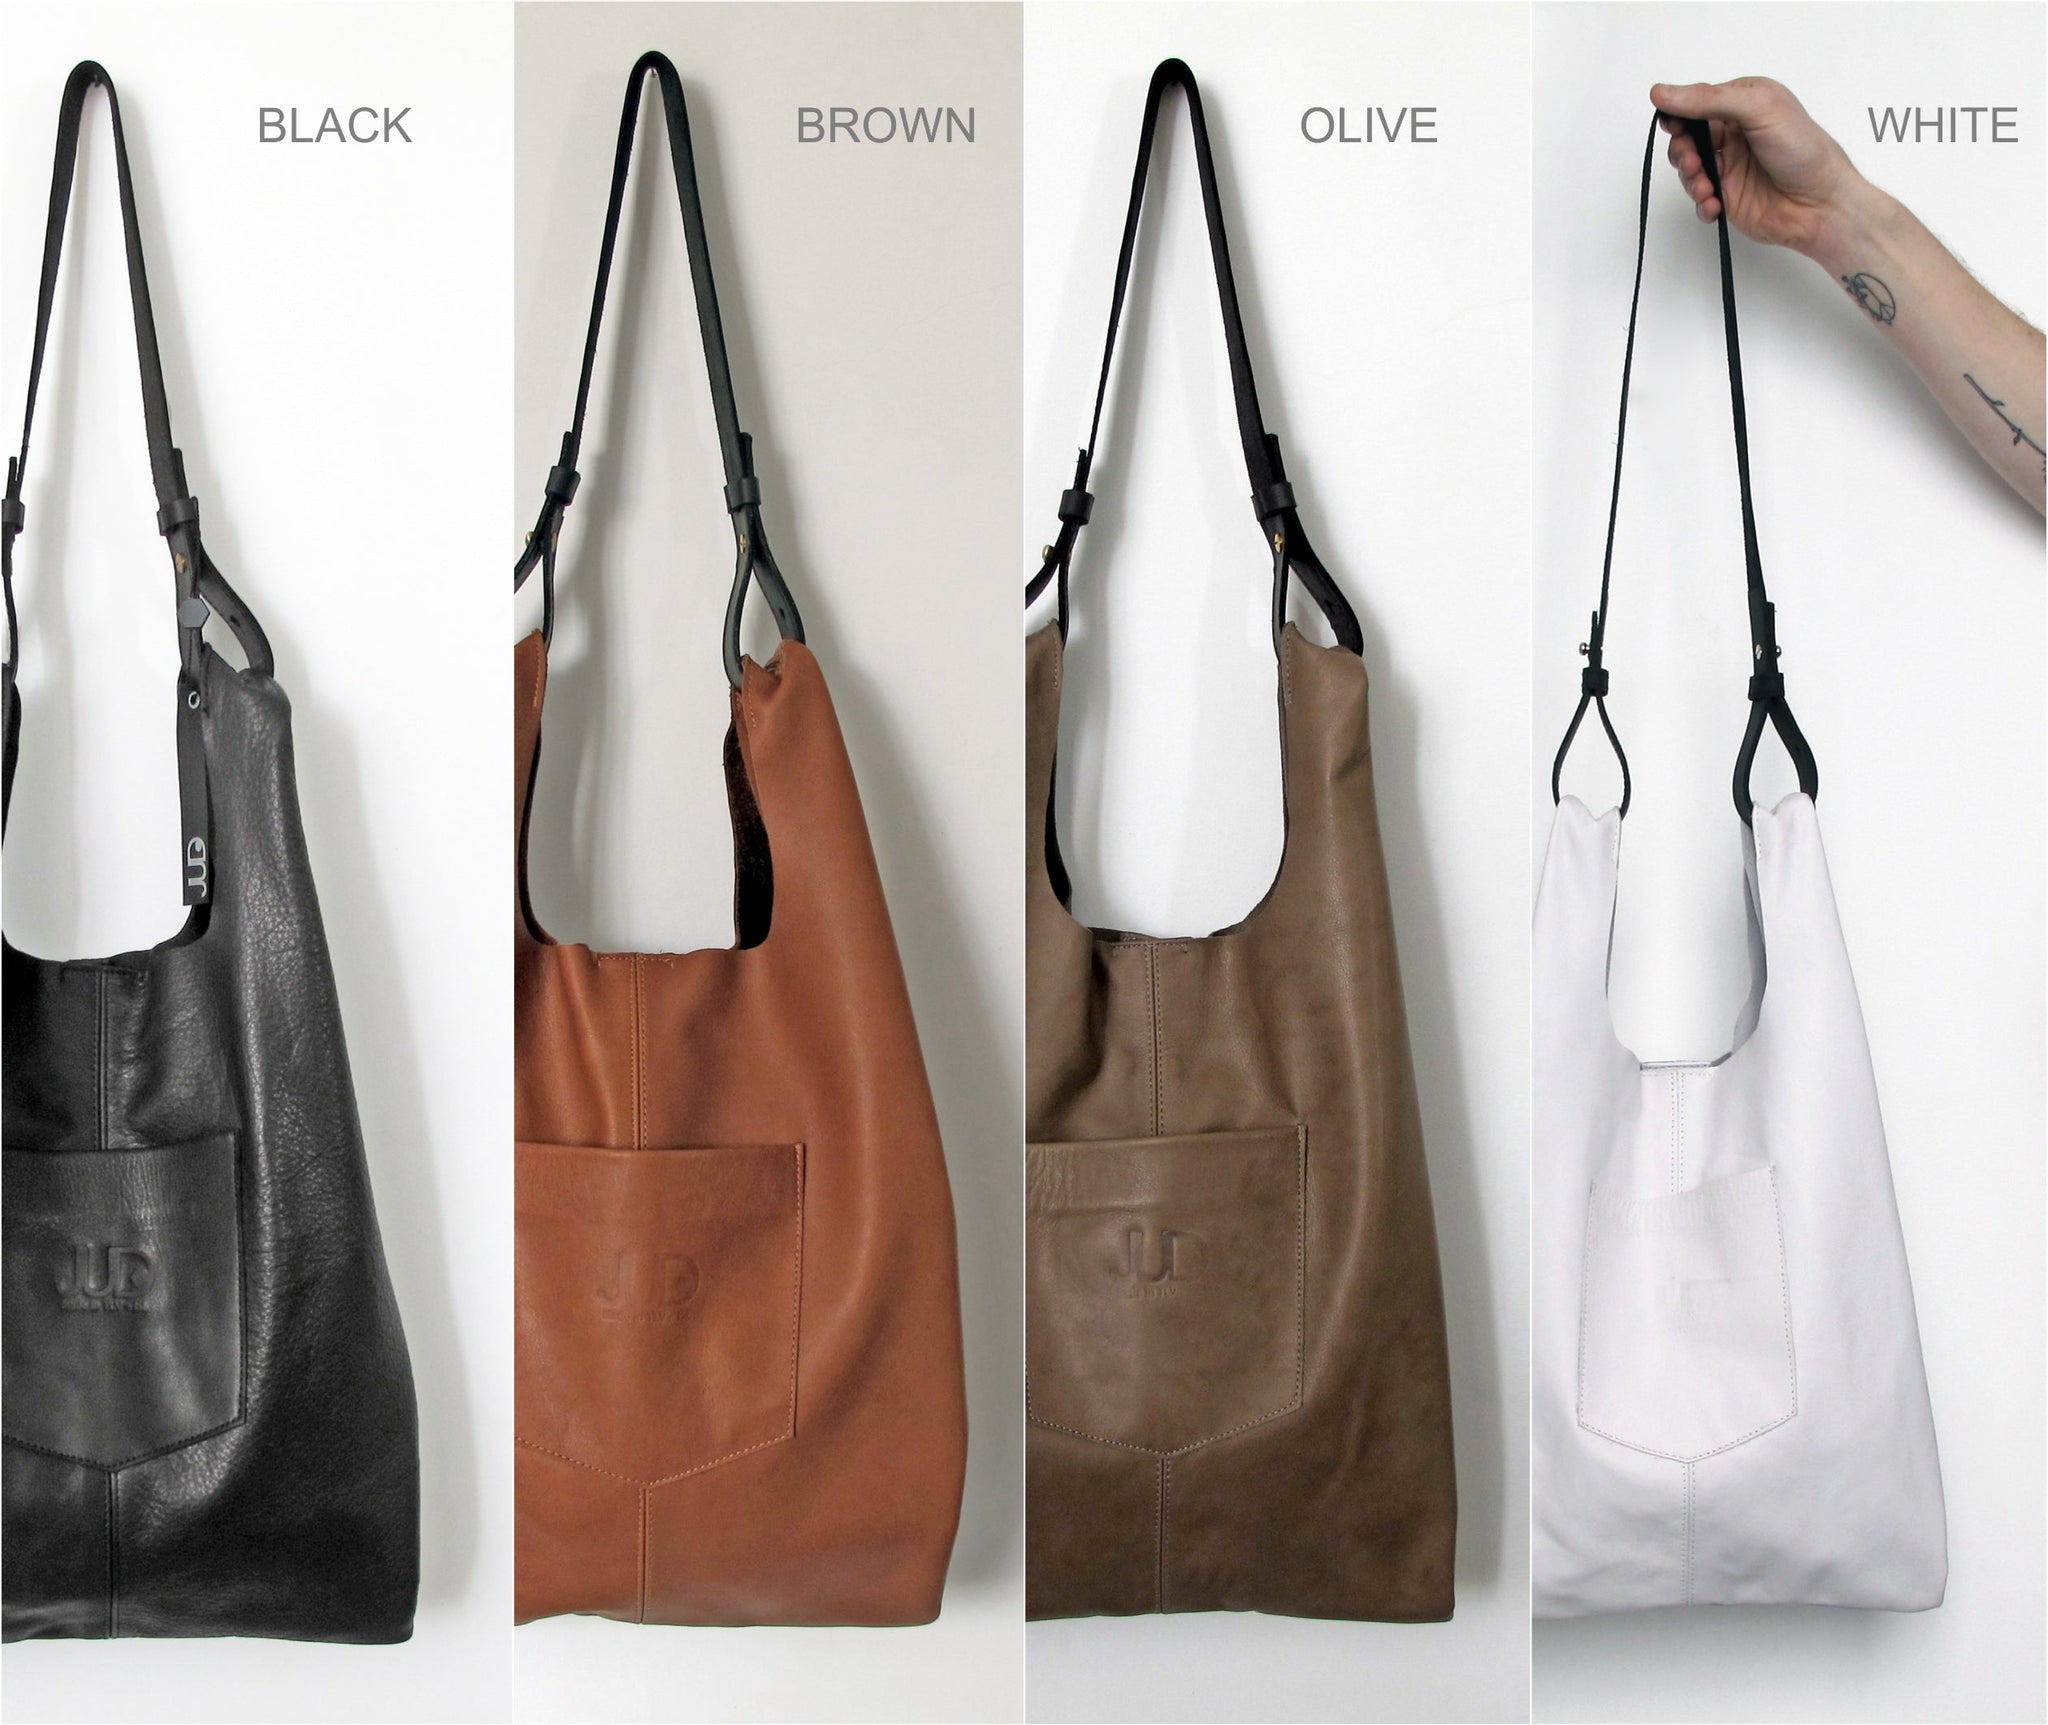 Soft leather tote bag handmade with premium quality Italian Napa leather. Available in black, white, brown and olive green